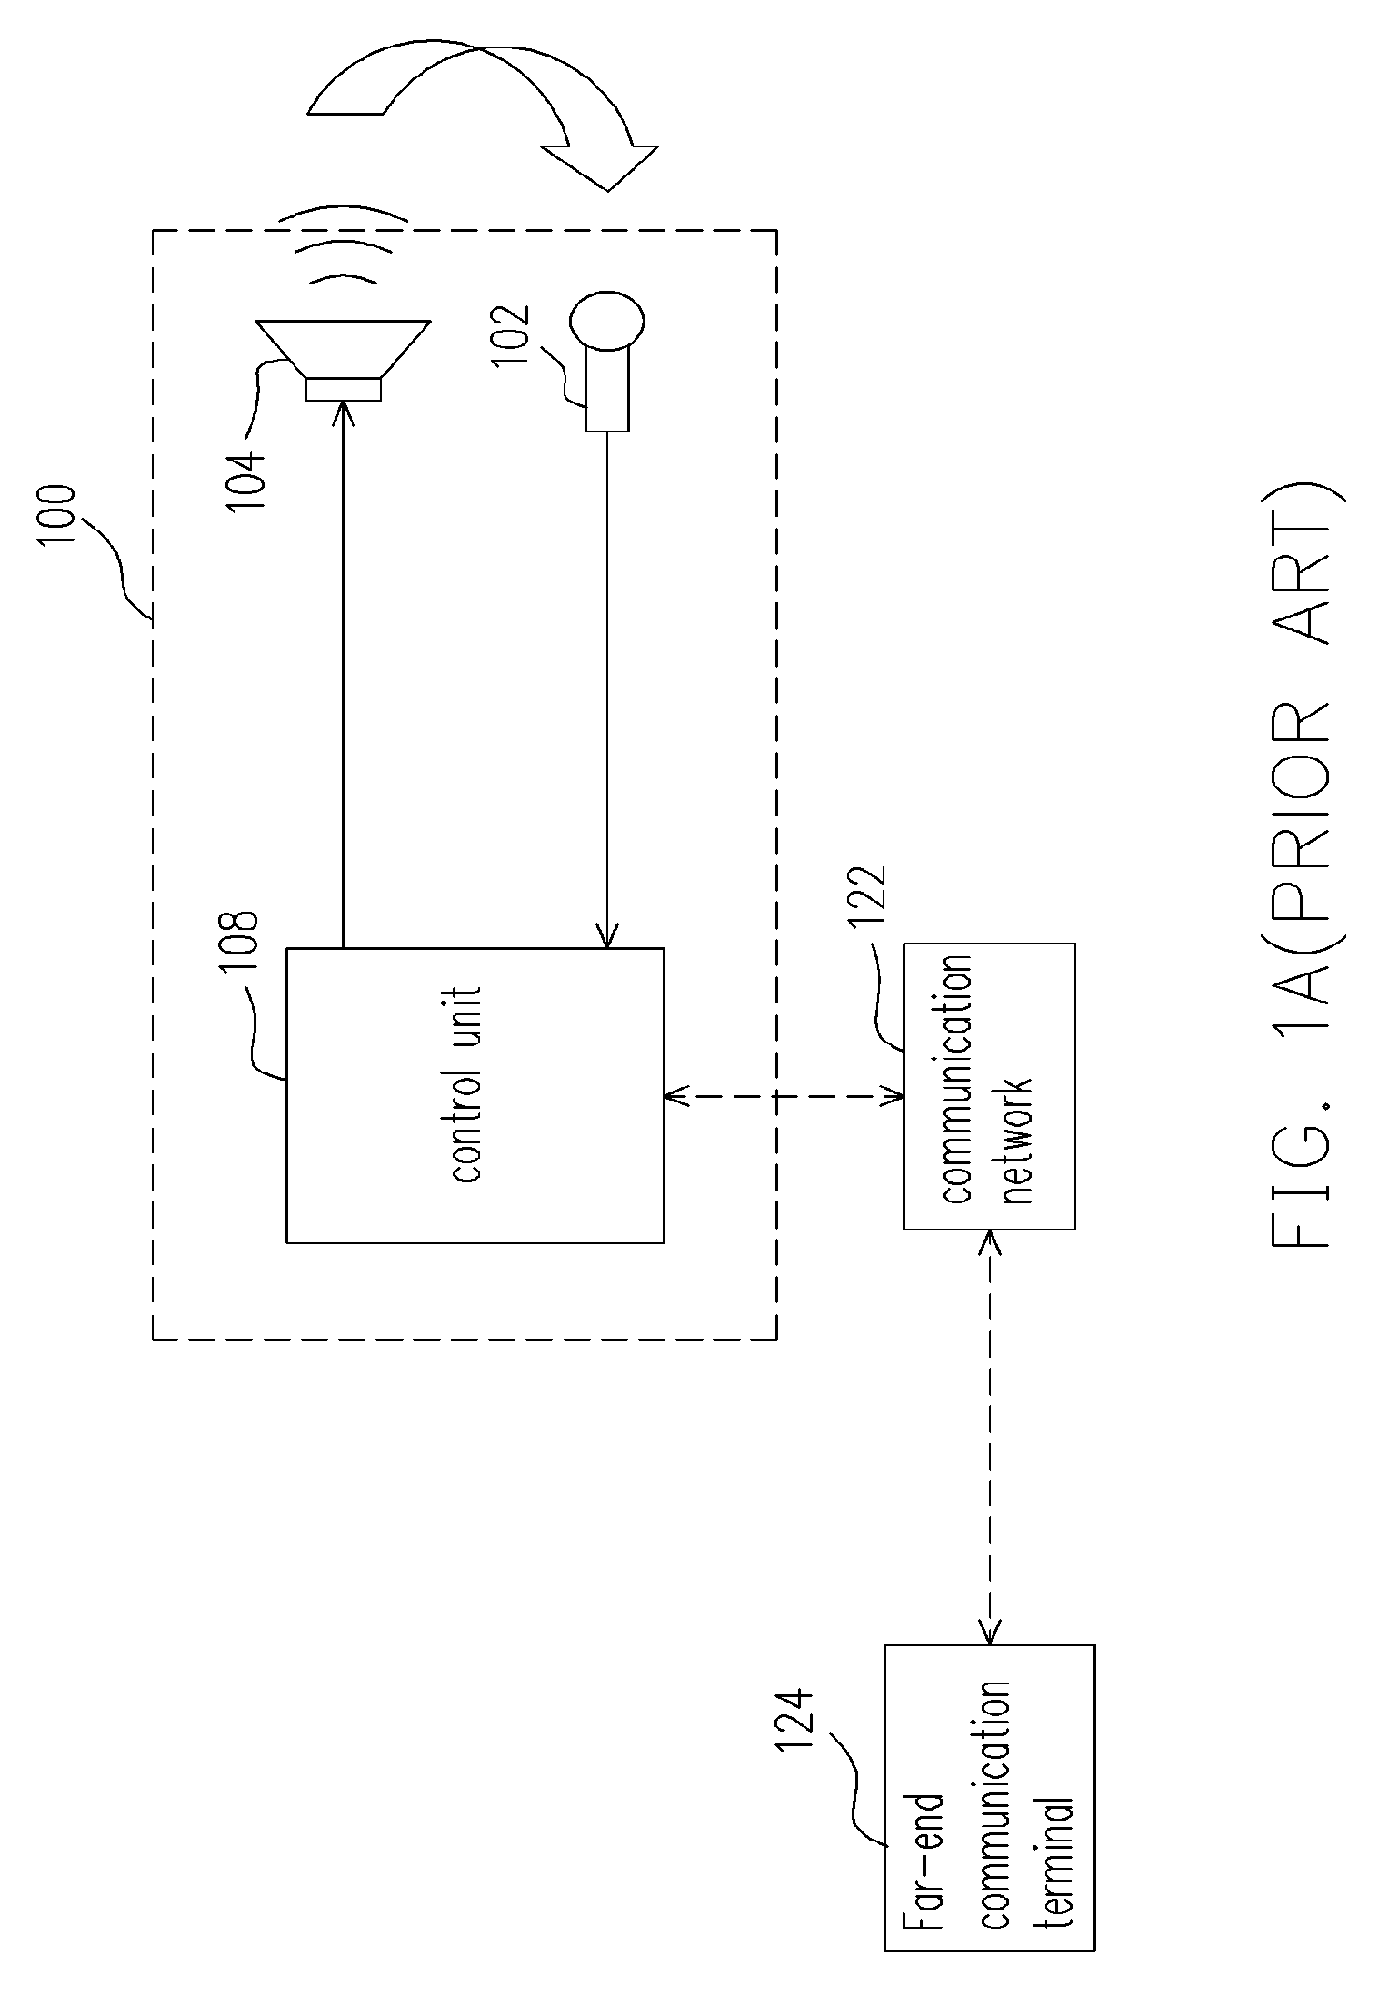 Dual microphone communication device for teleconference